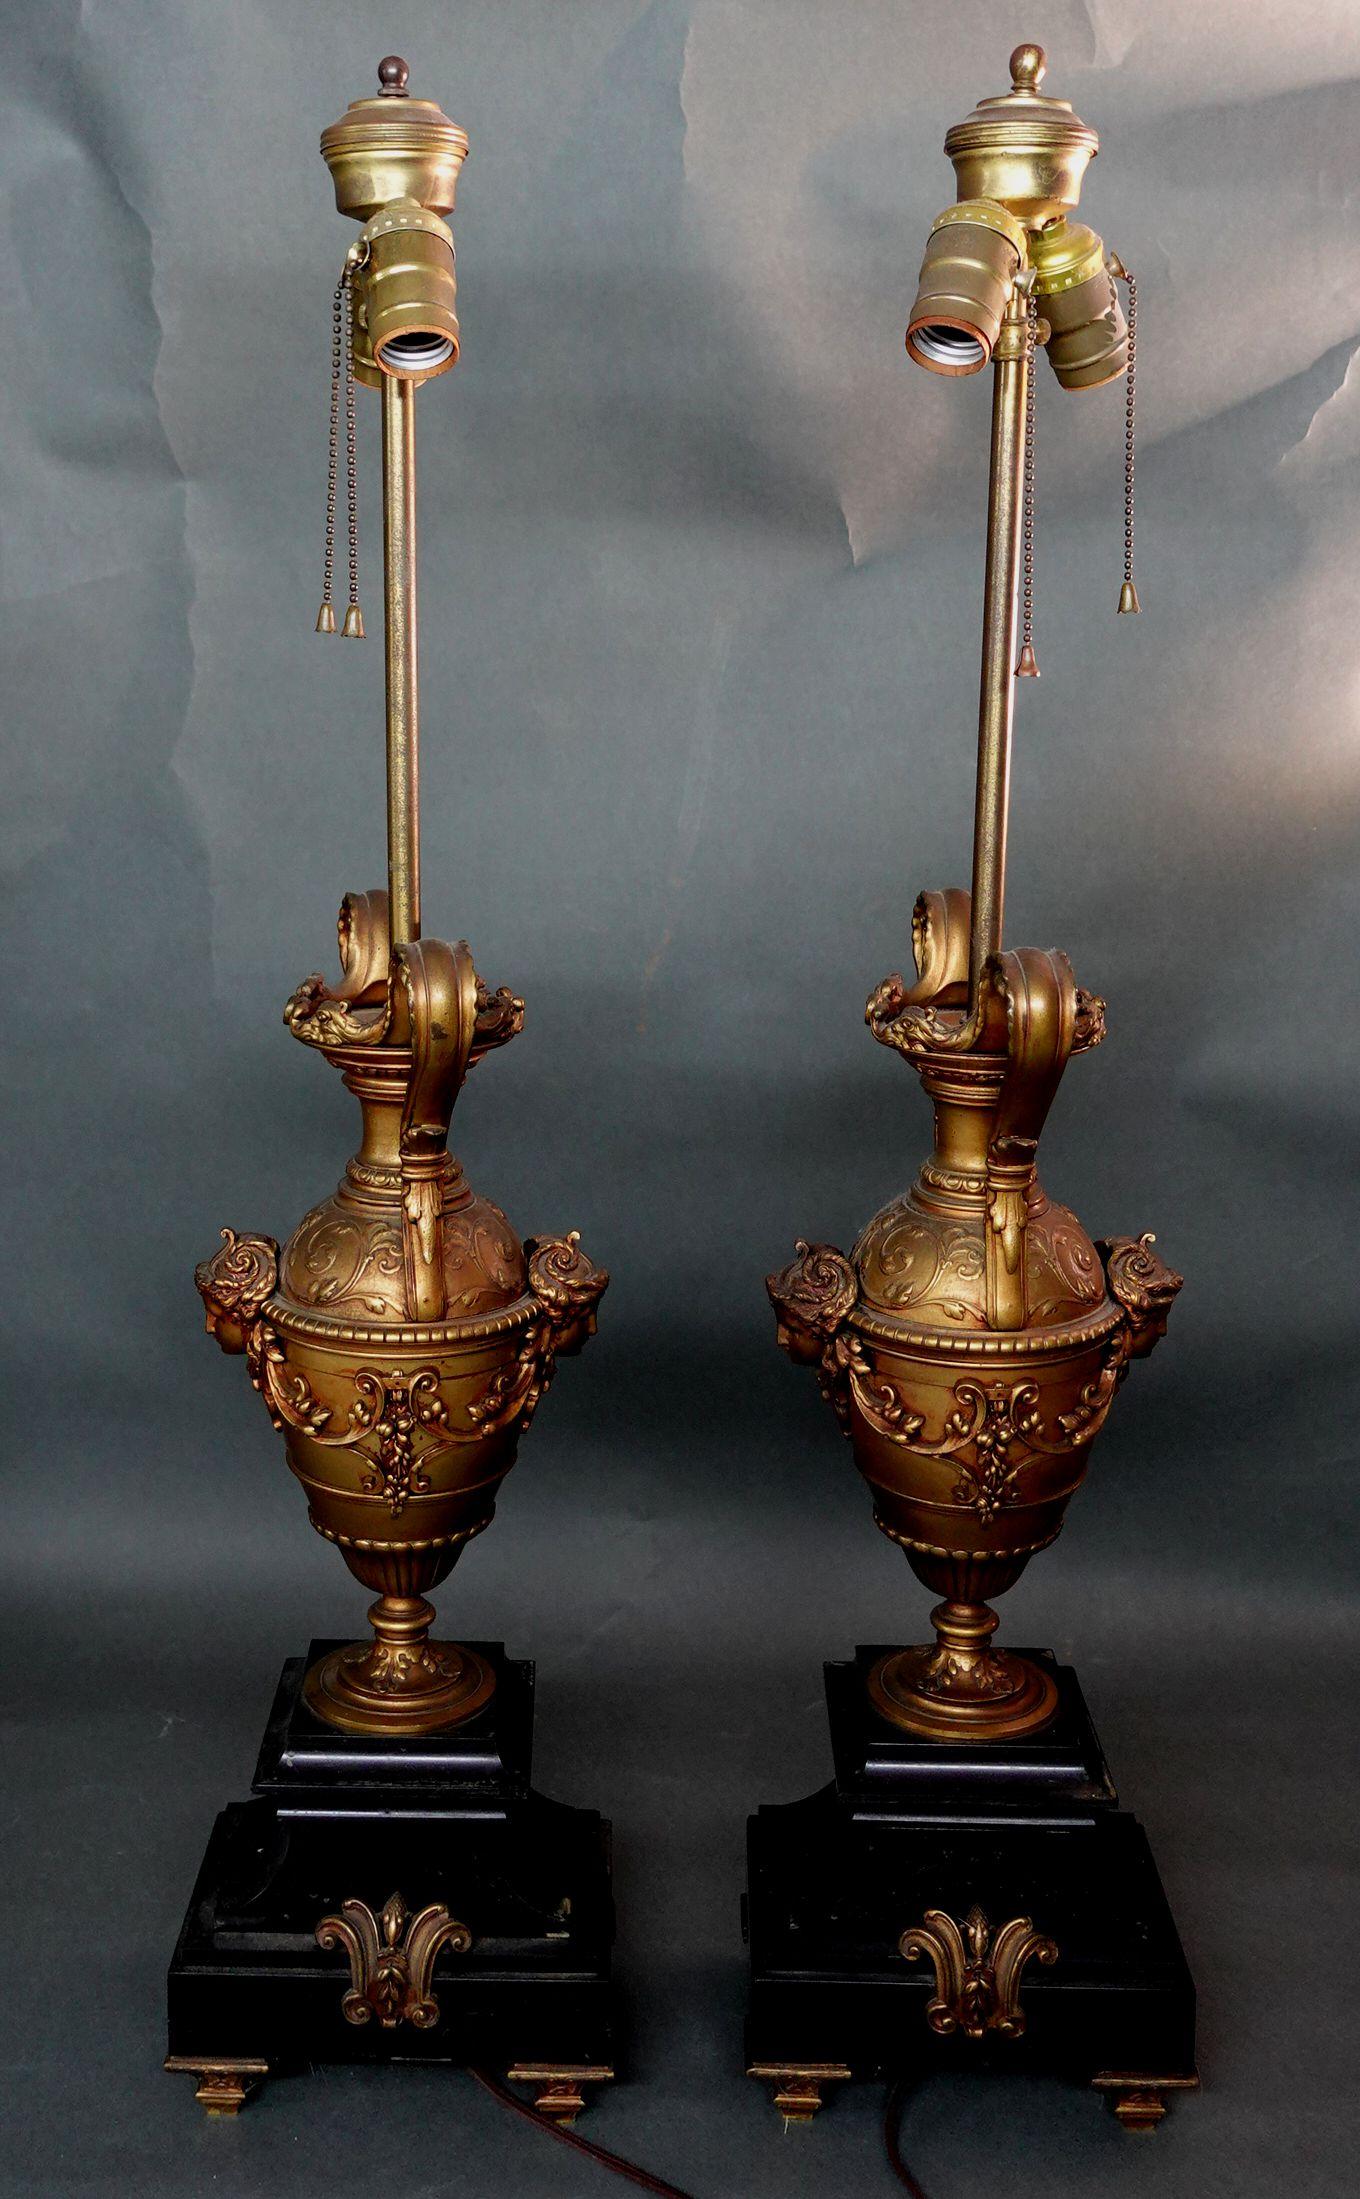 Pair of Neoclassical-Style Gilt-Bronze Urns Lamps on Black Marble Bases For Sale 2